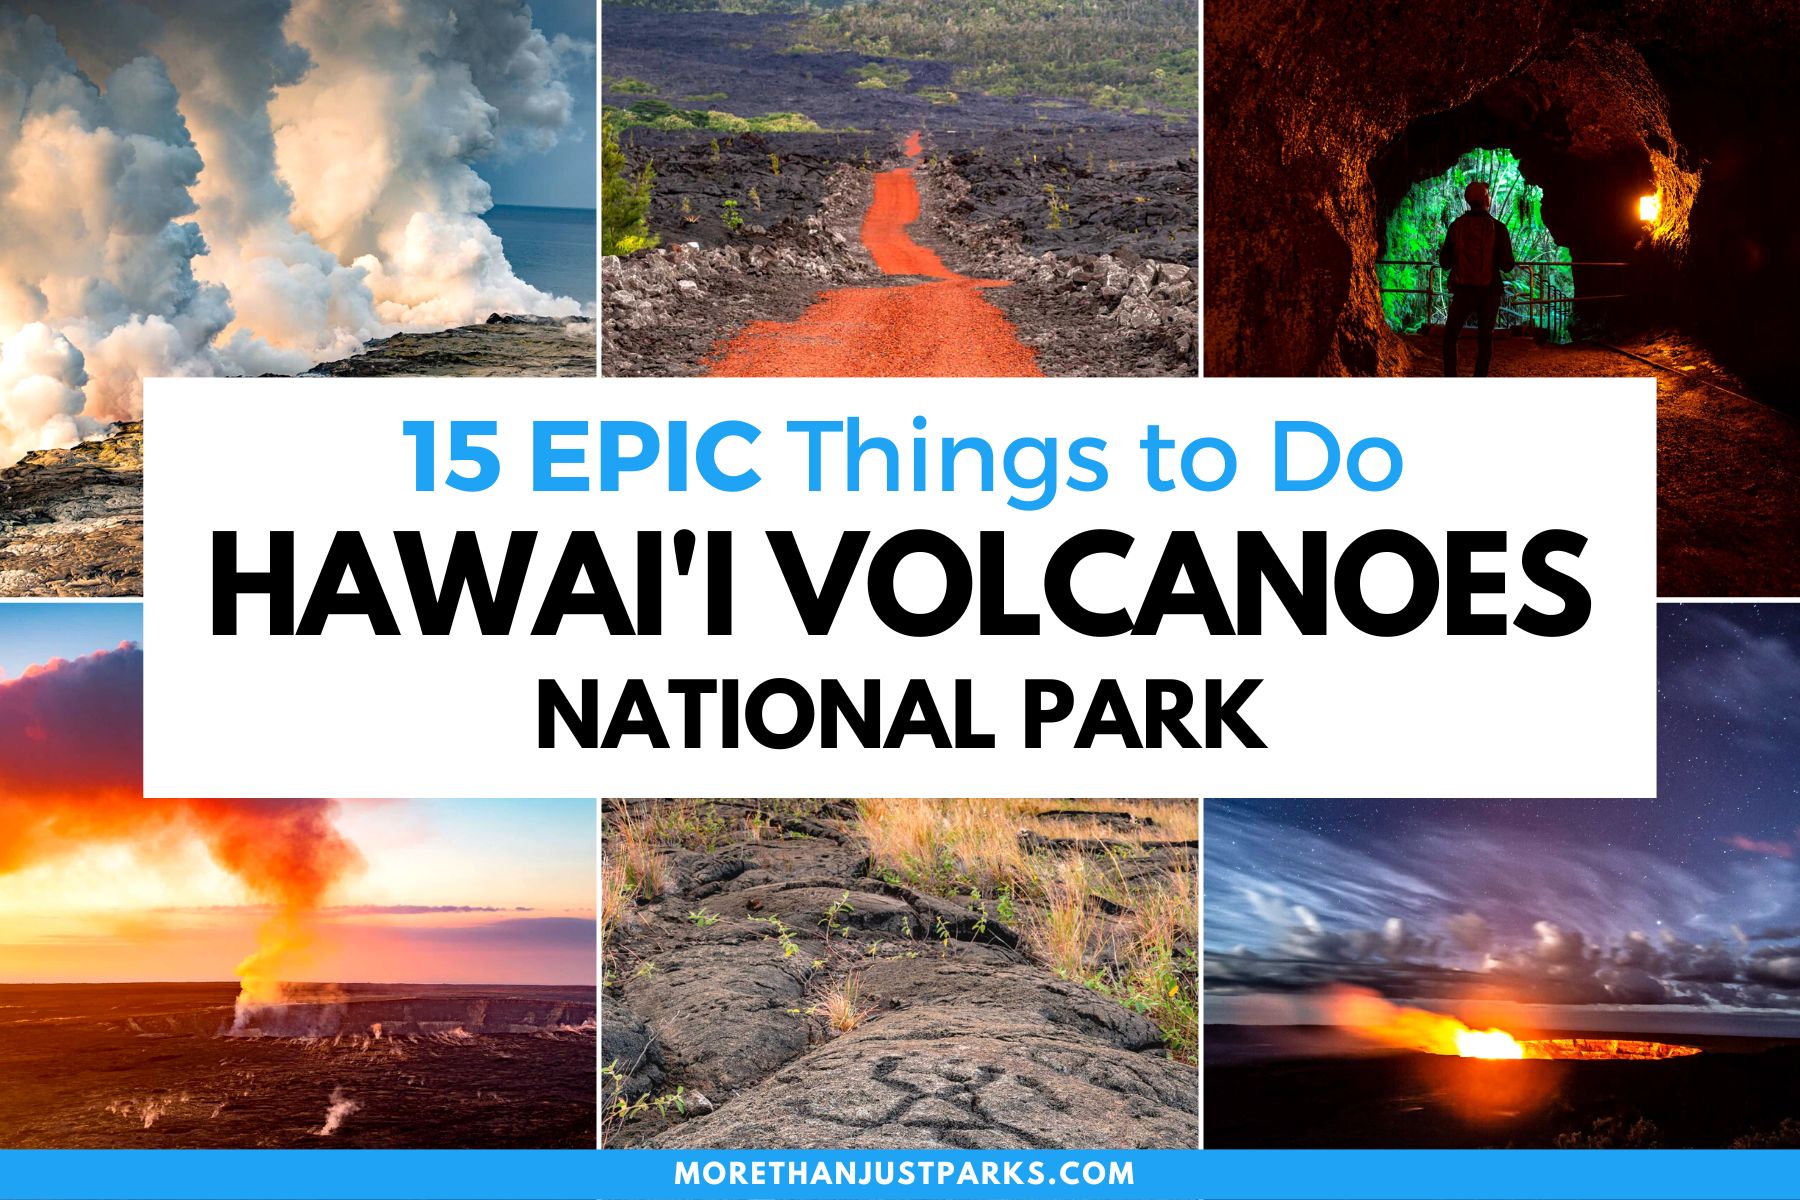 things to do hawaii volcanoes national park, things to do hawaii volcanoes, hawaii national park